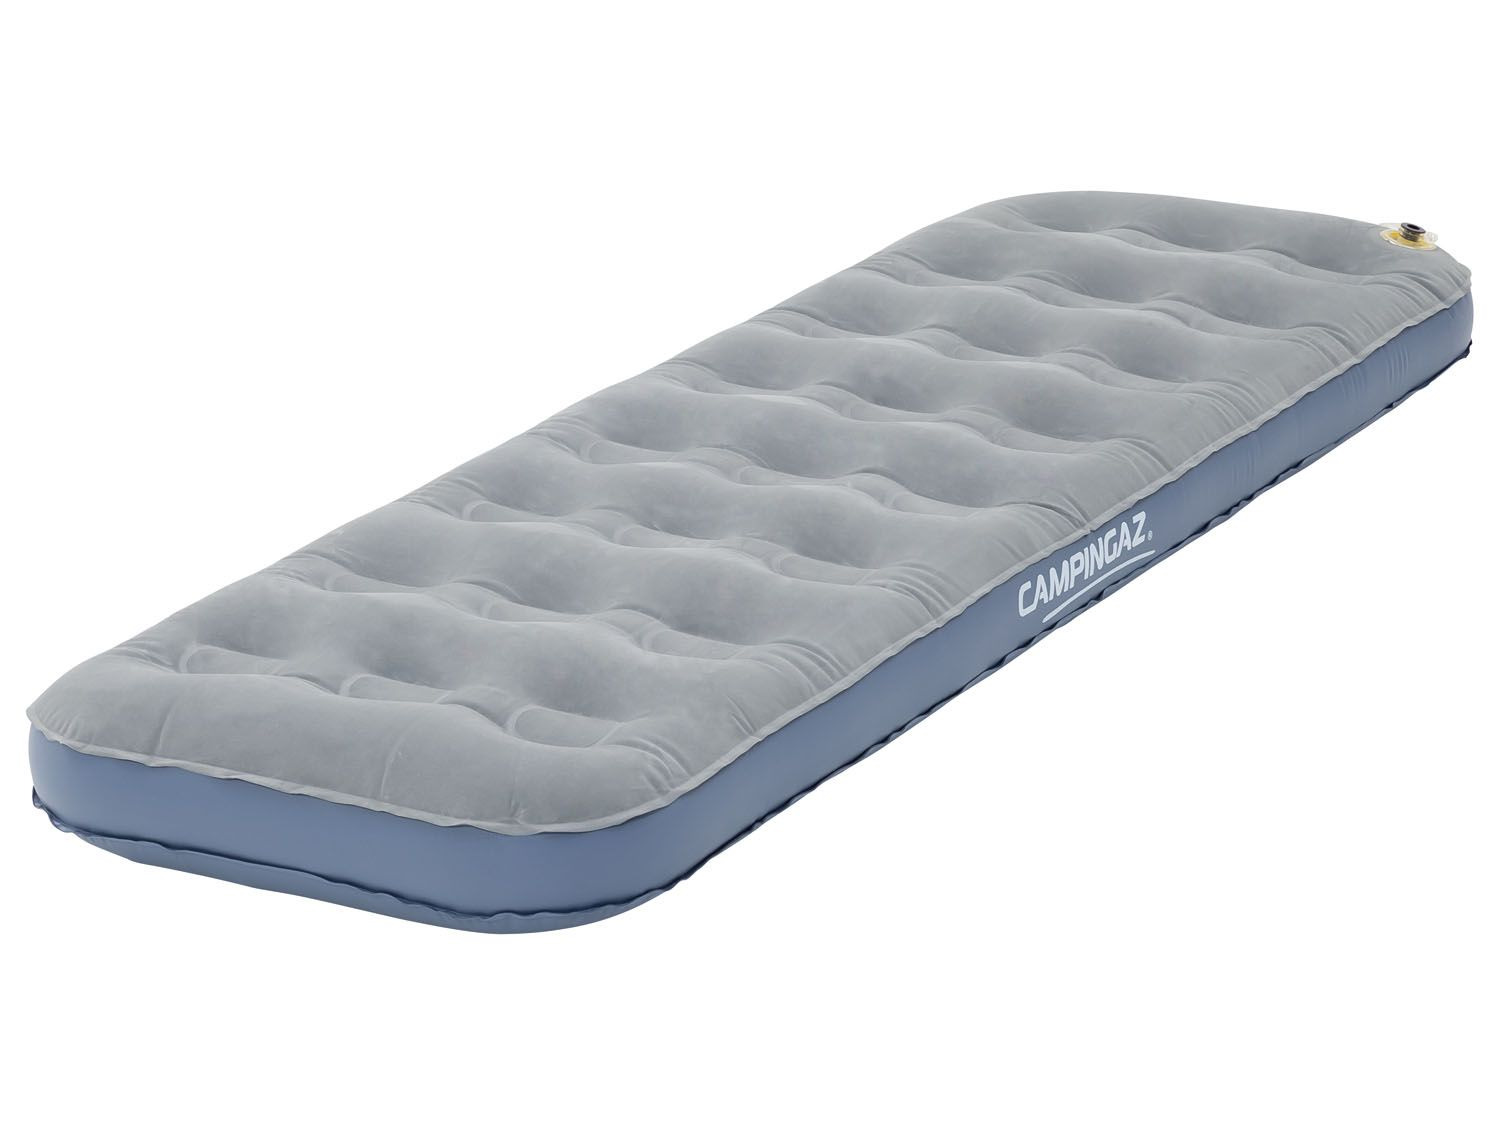 Campingaz Luchtmatras Quickbed™, 189 x 60 | Lidl.be